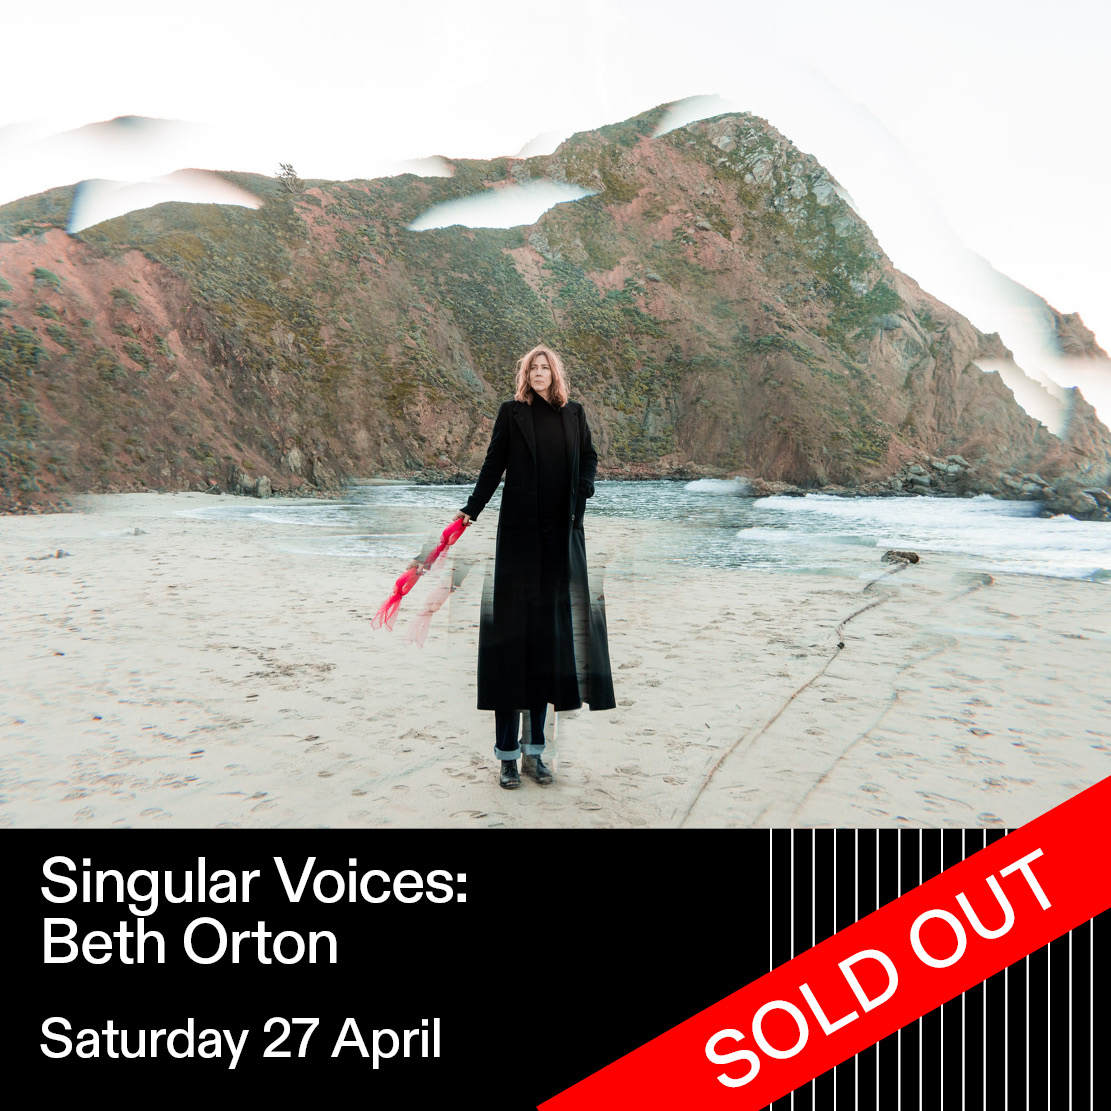 Our Singular Voices show @beth_orton has officially SOLD OUT. Missed out? Sign up to the waitlist! cityrecital.ink/bethwaitlist #bethorton #folktronica #sydney